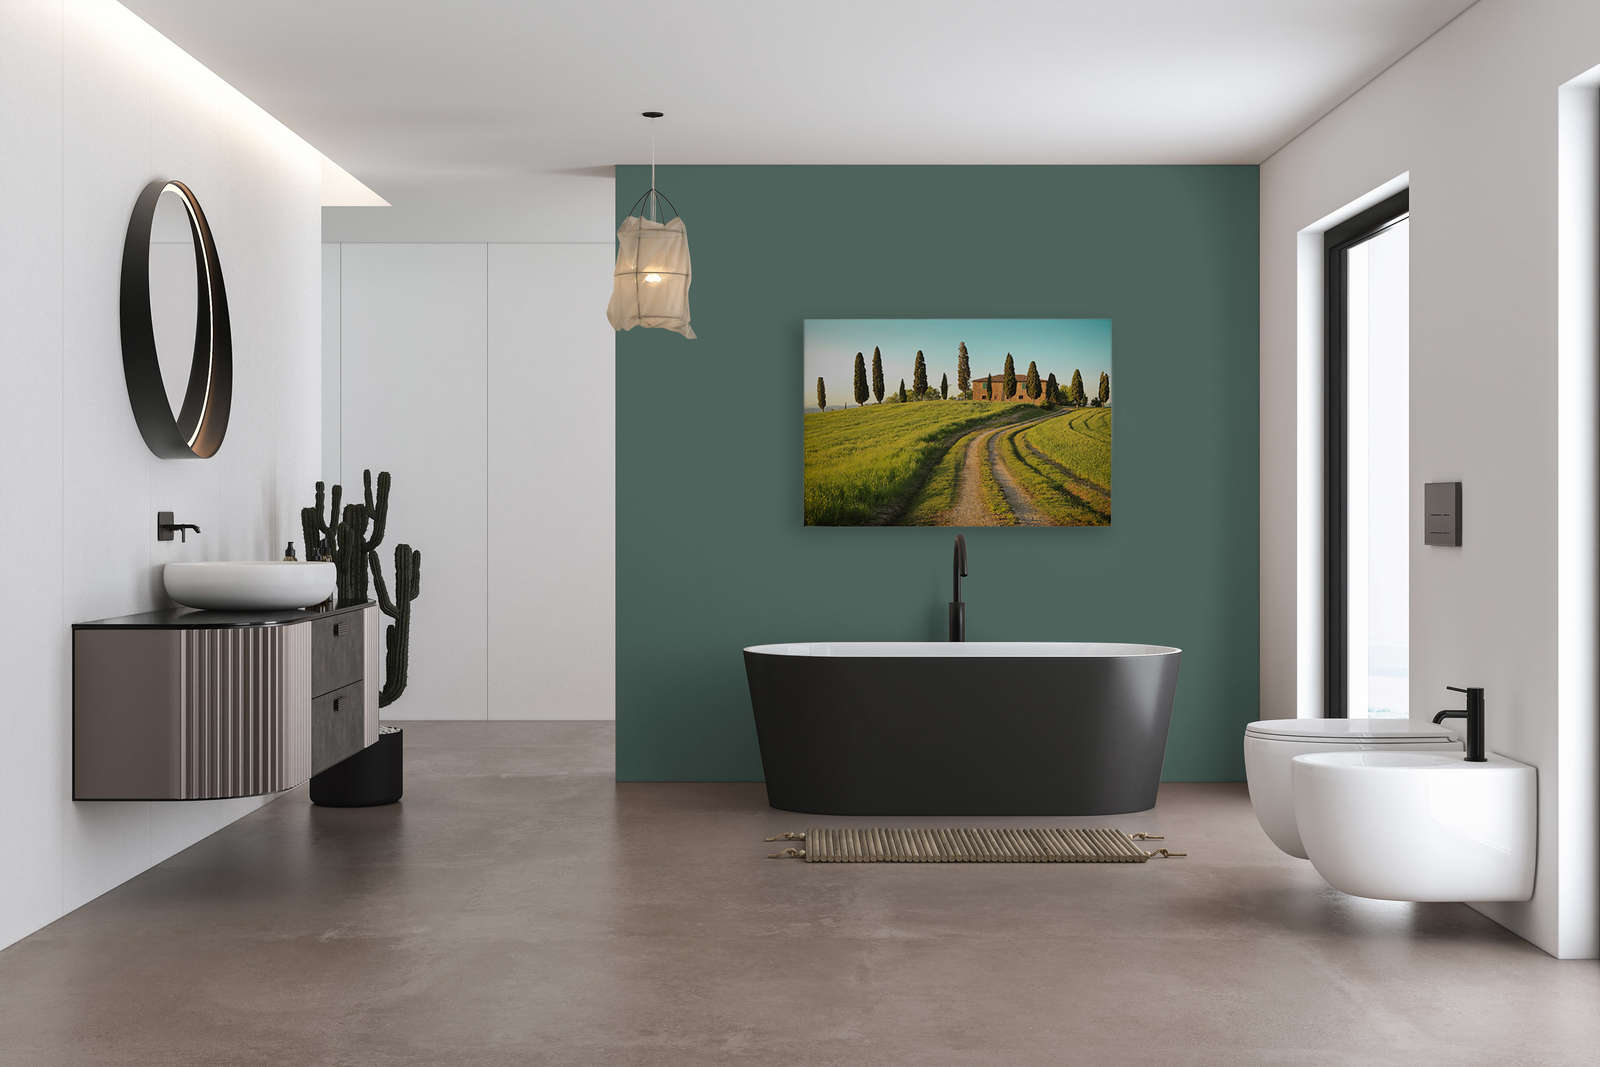             Canvas painting Villa with cypresses in Tuscany - 1.20 m x 0.80 m
        